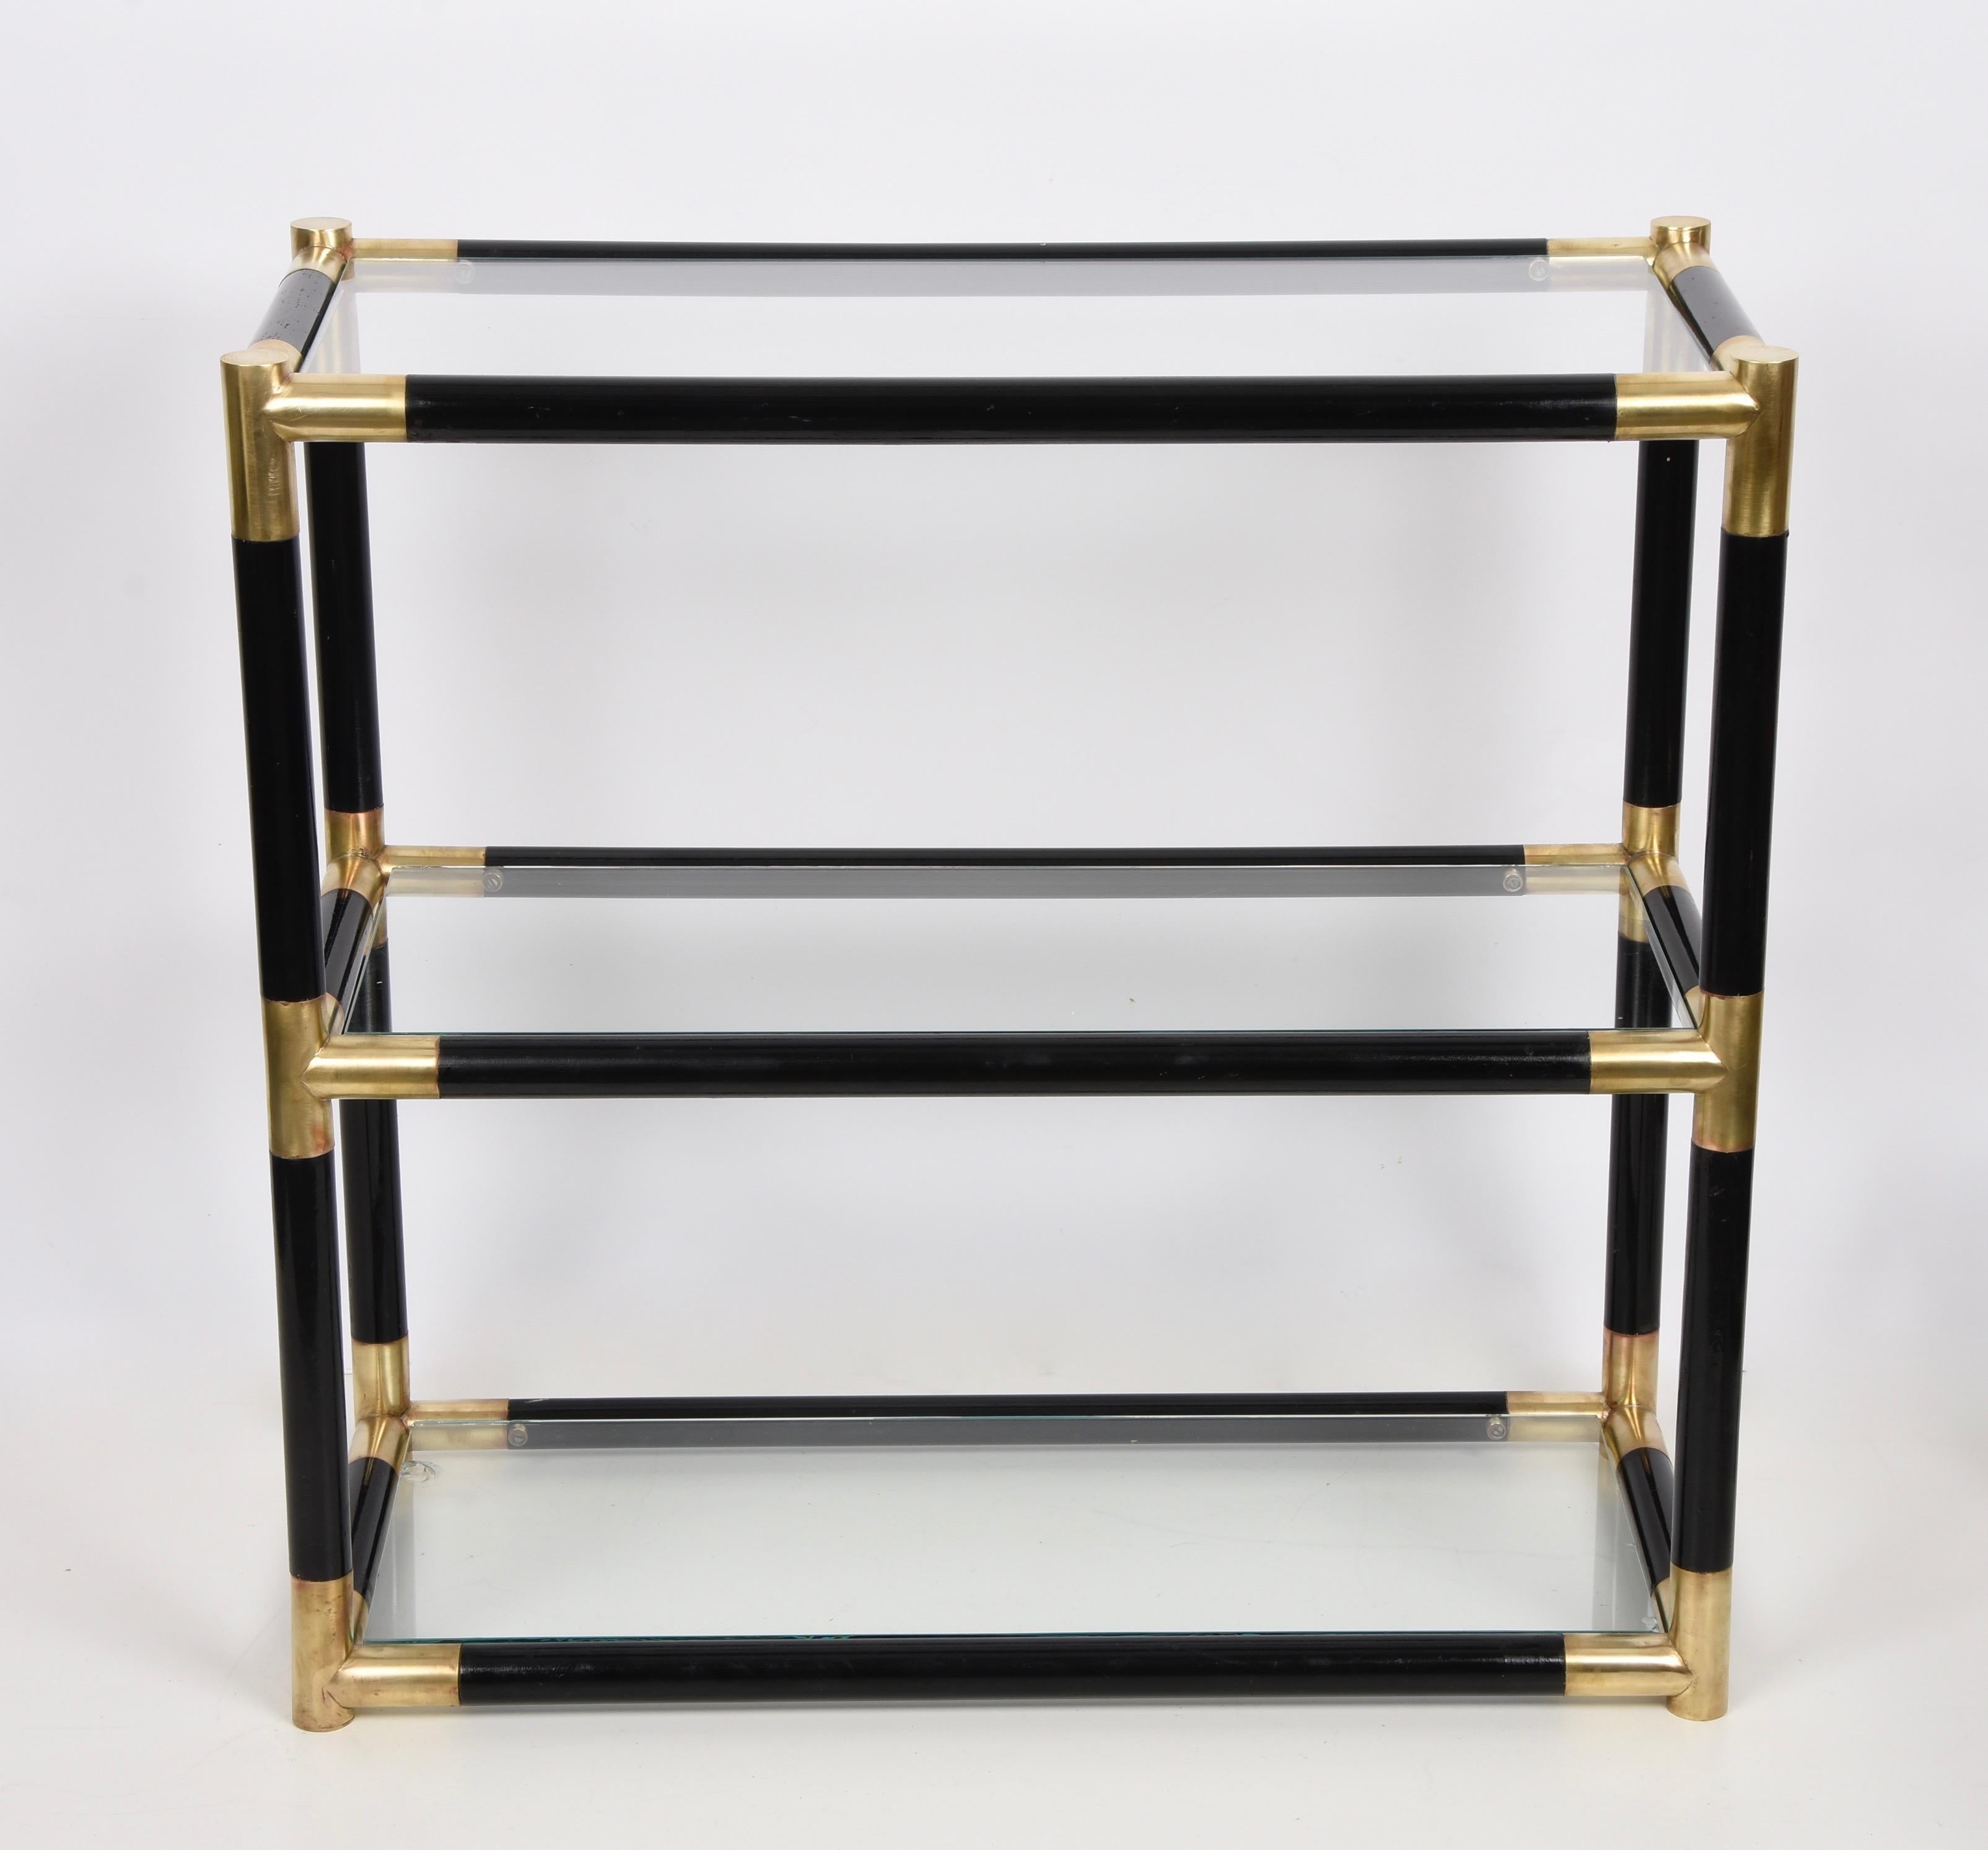 20th Century Midcentury Bamboo and Brass Italian Bookcase with Three Crystal Shelves, 1970s